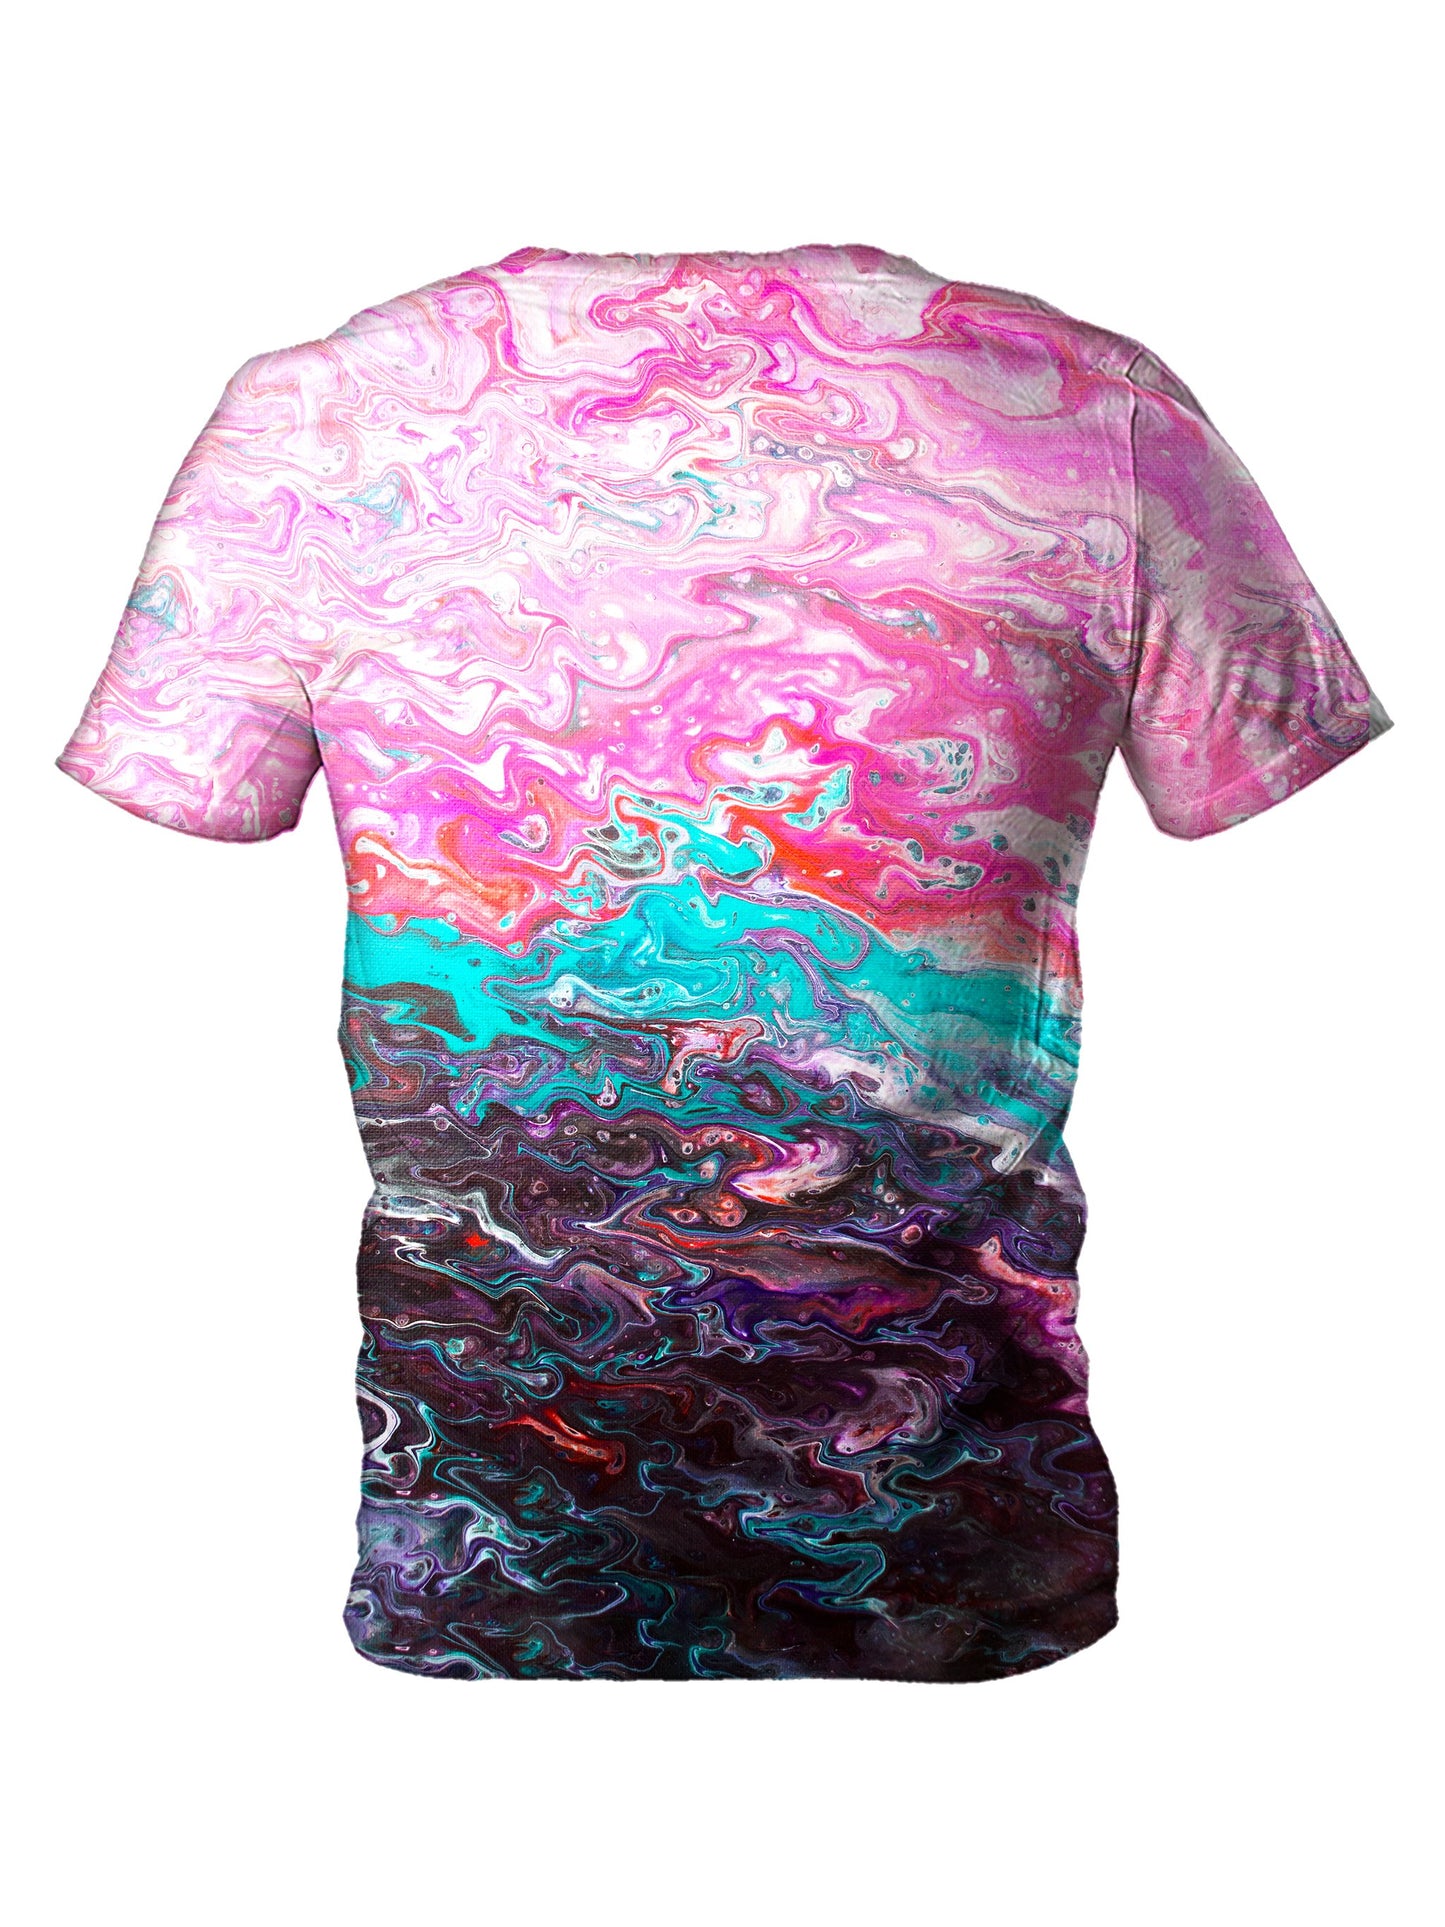 Back view of all over print psychedelic marbling t shirt by Gratefully Dyed Apparel. 